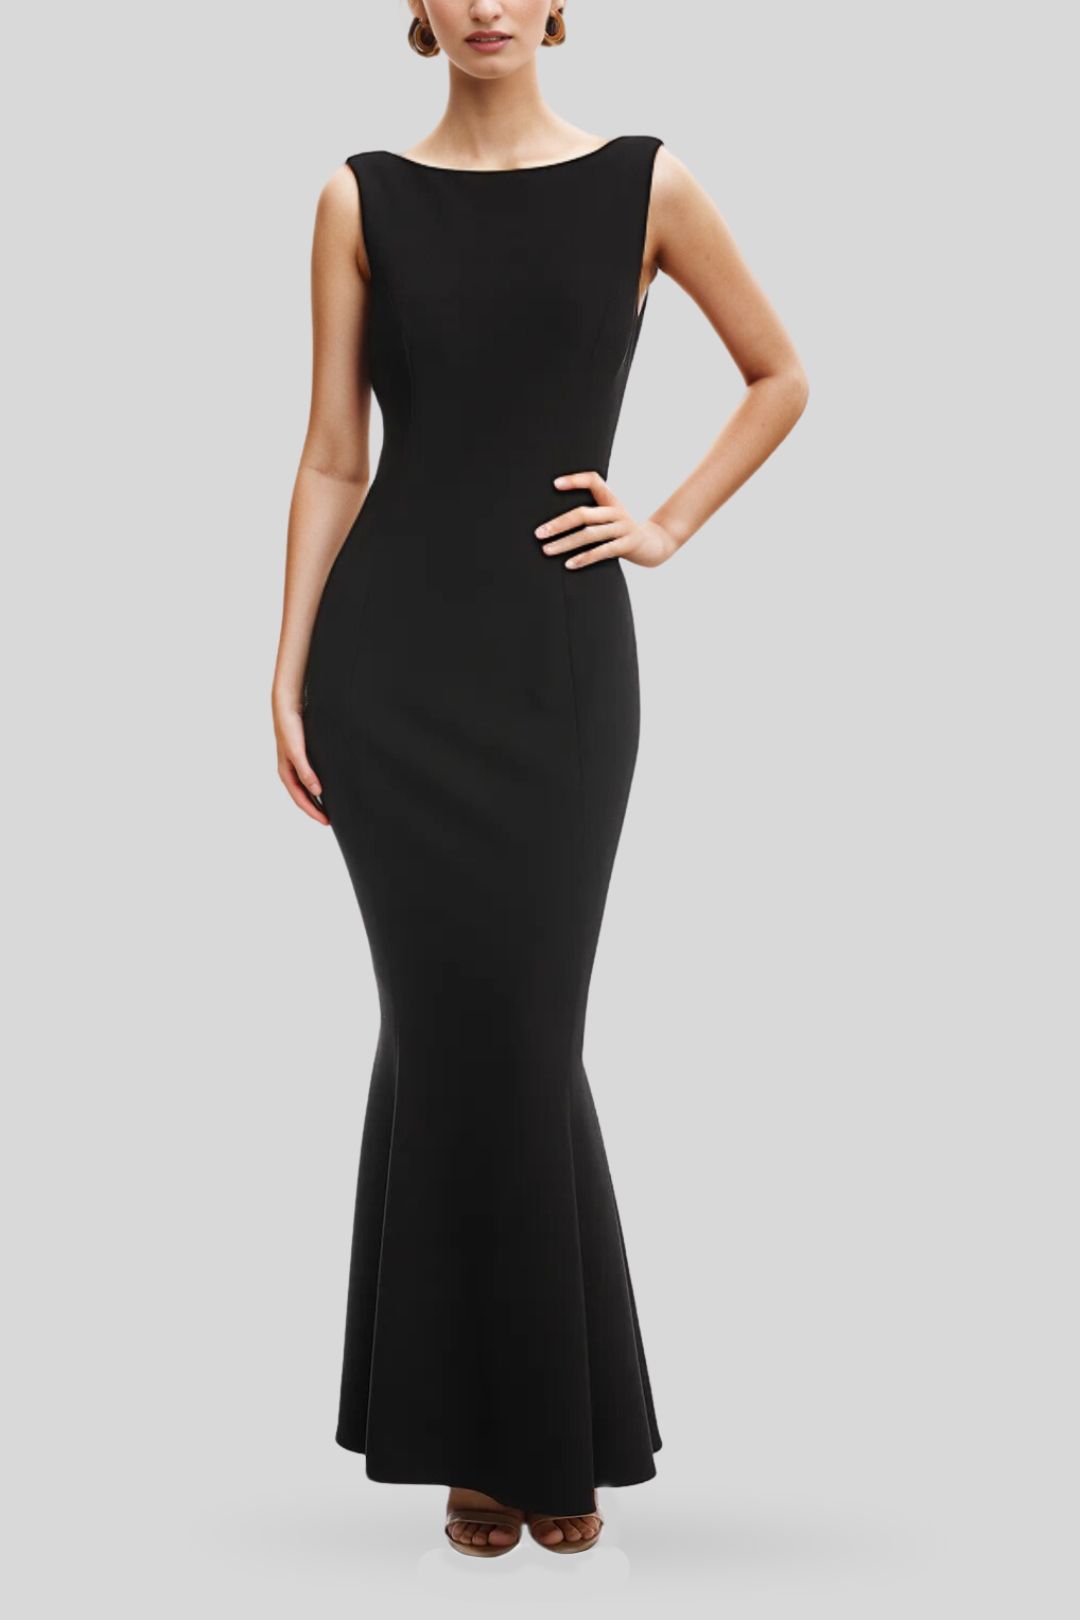 Grace and Hart - Eternal Obsession Gown  - Black - Front